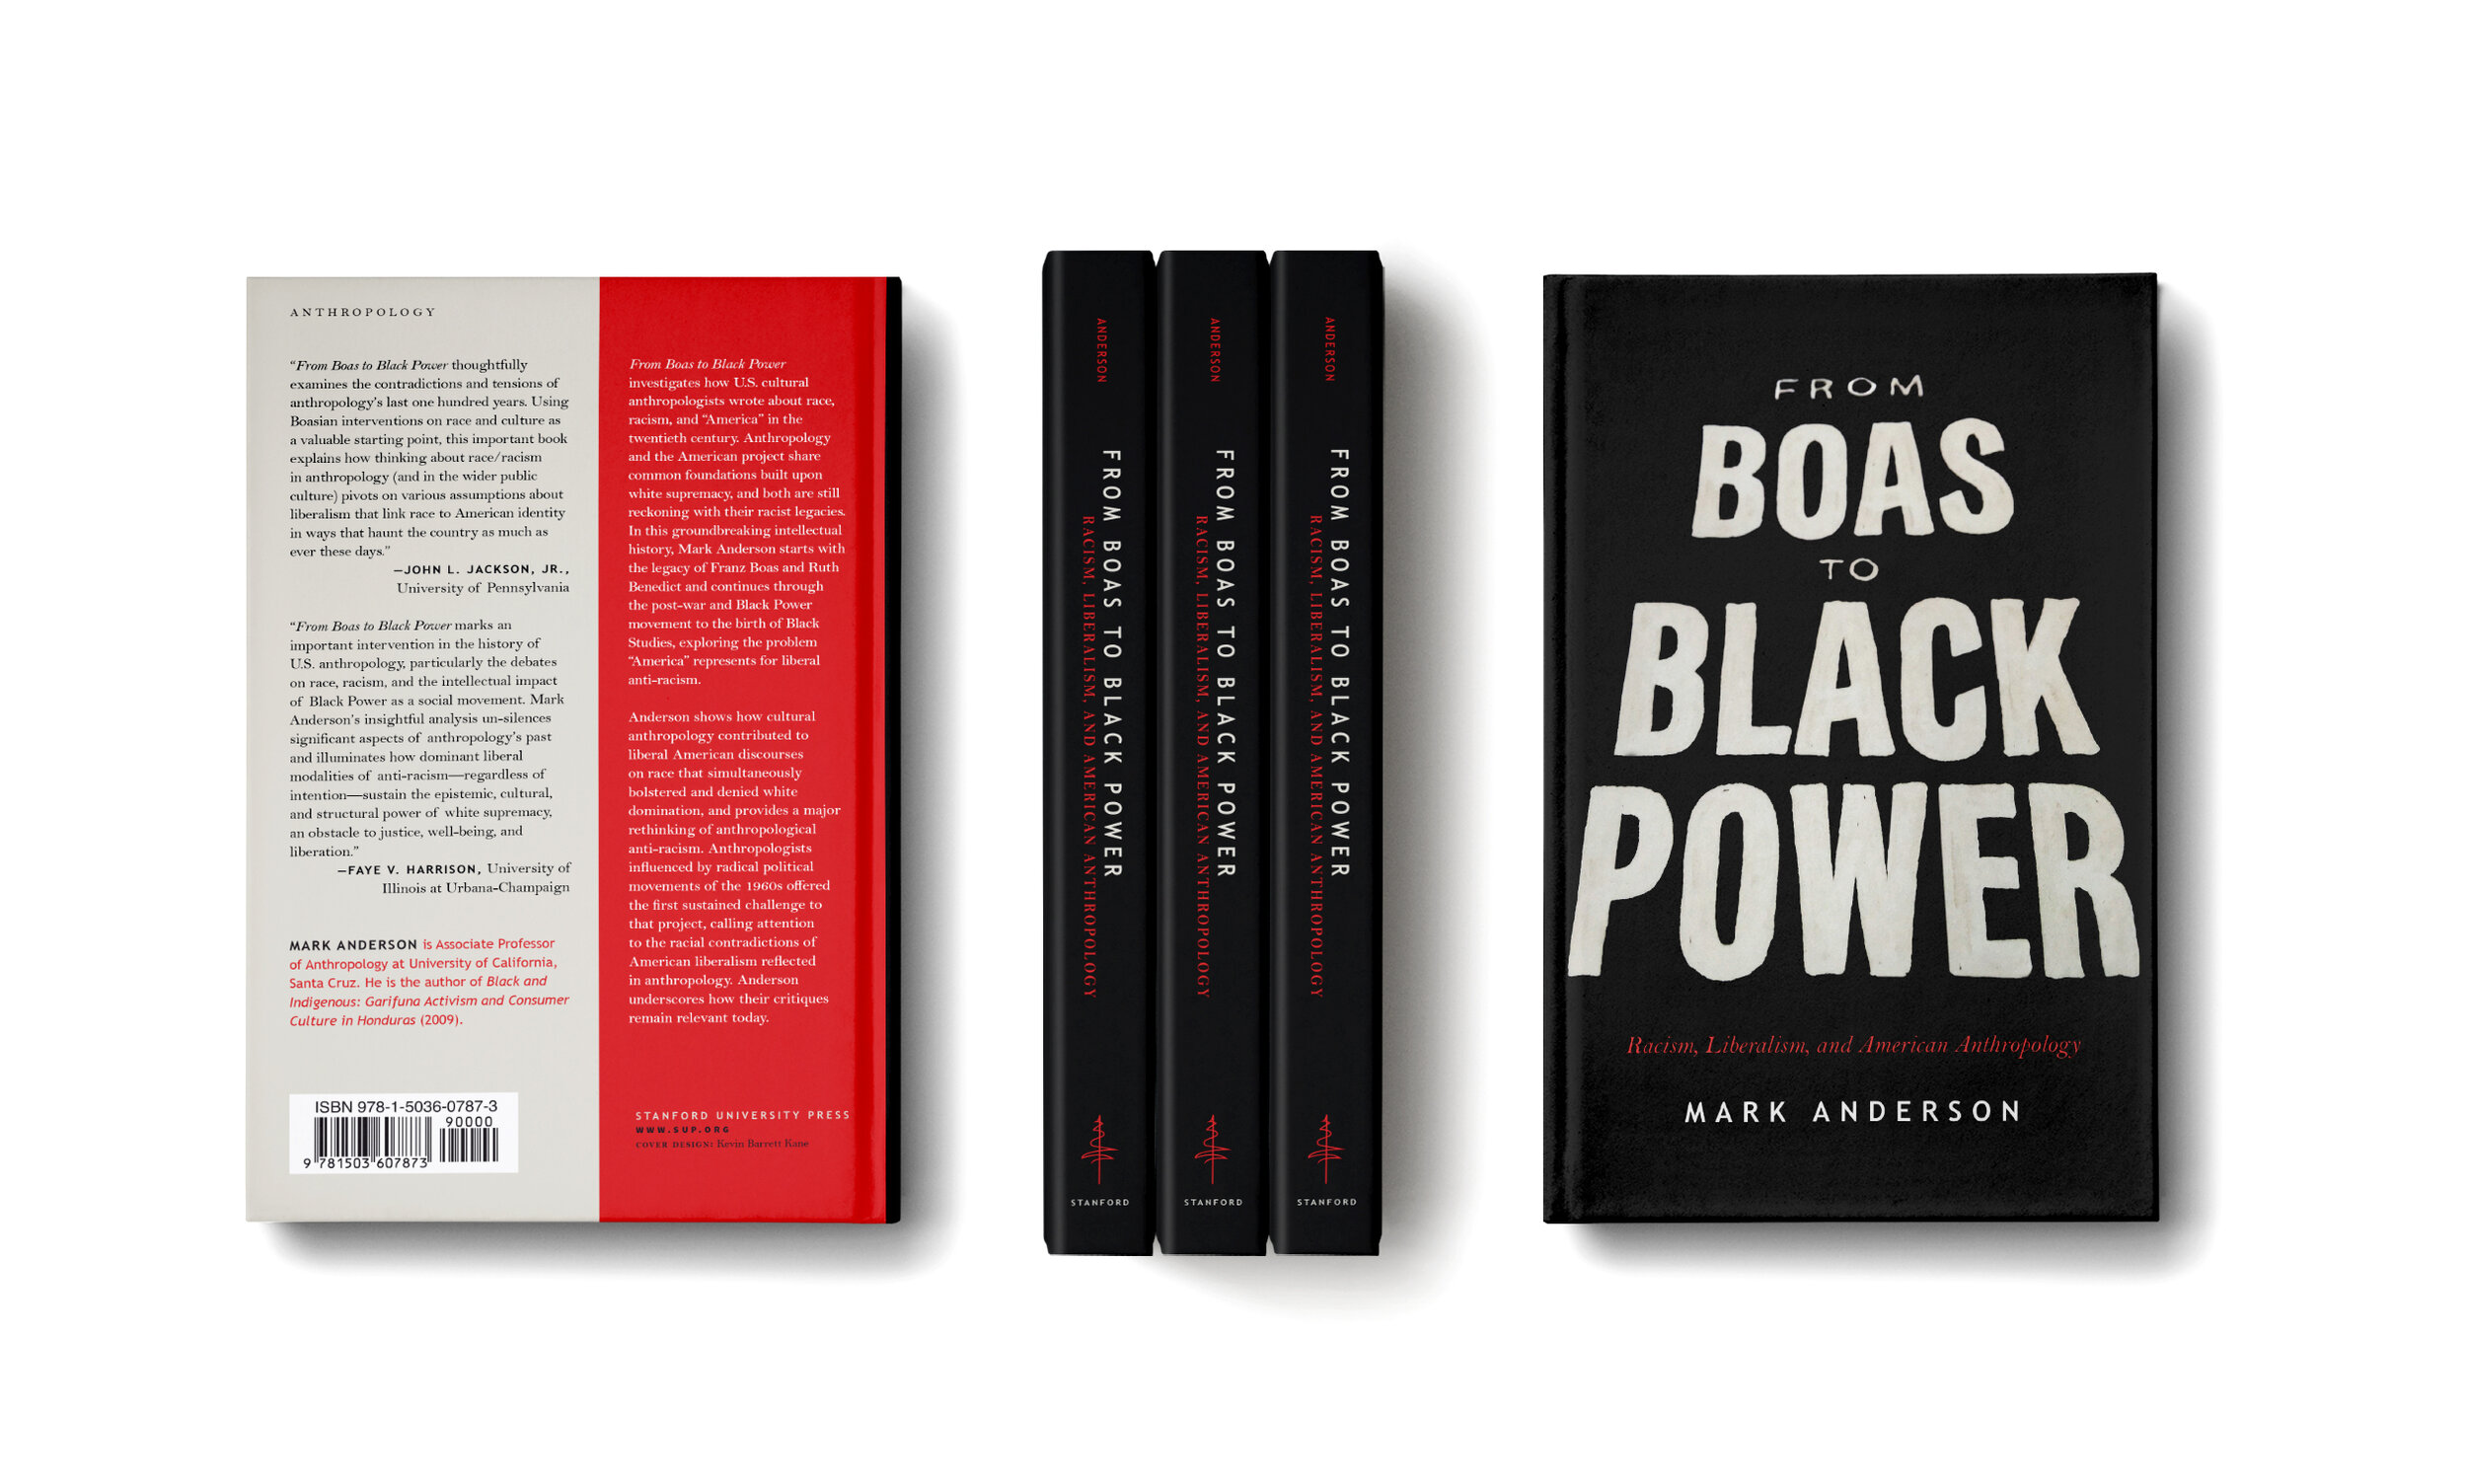 From Boas to Black Power, by Mark Anderson (Stanford, 2018)